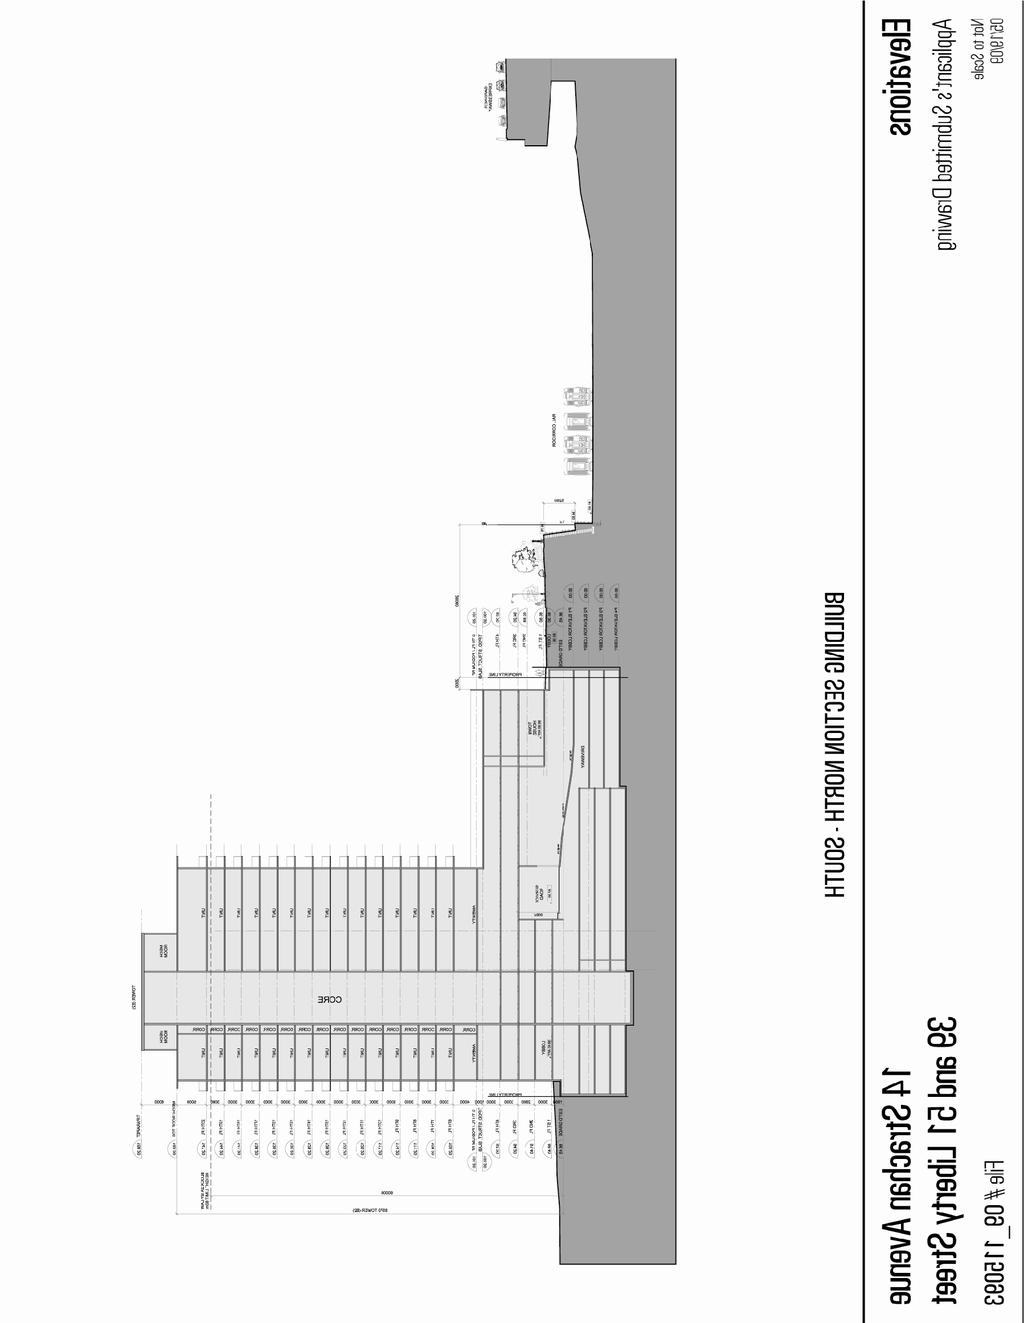 Attachment 2: East Elevation/Section Staff report for action